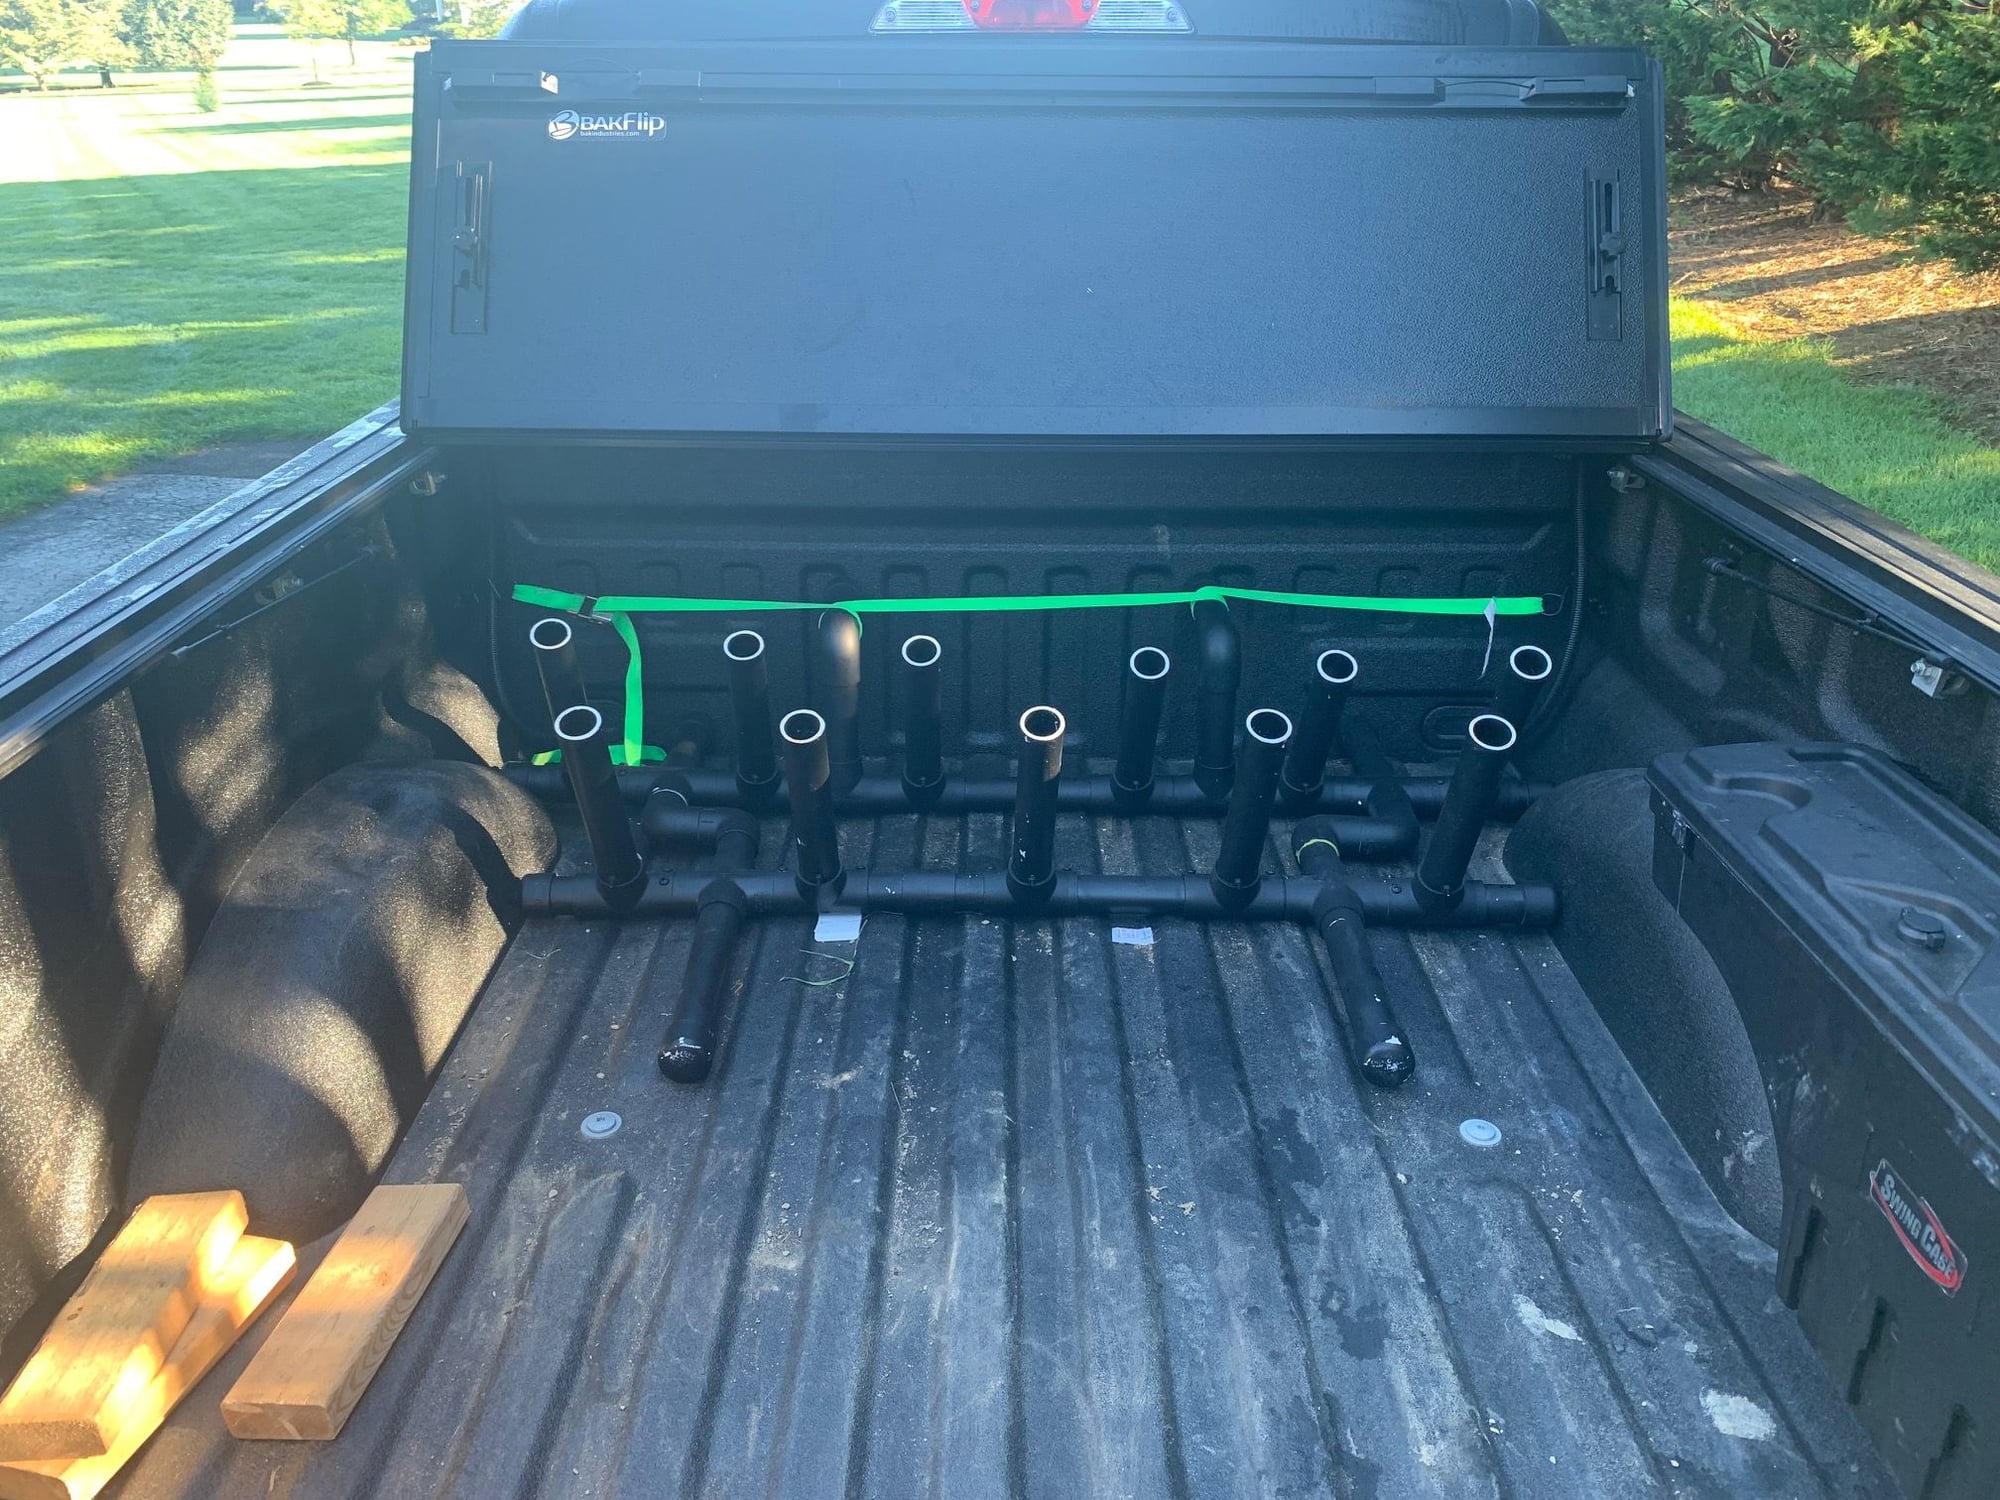 Truck bed fishing rod transport rack / holder - $40 - The Hull Truth -  Boating and Fishing Forum